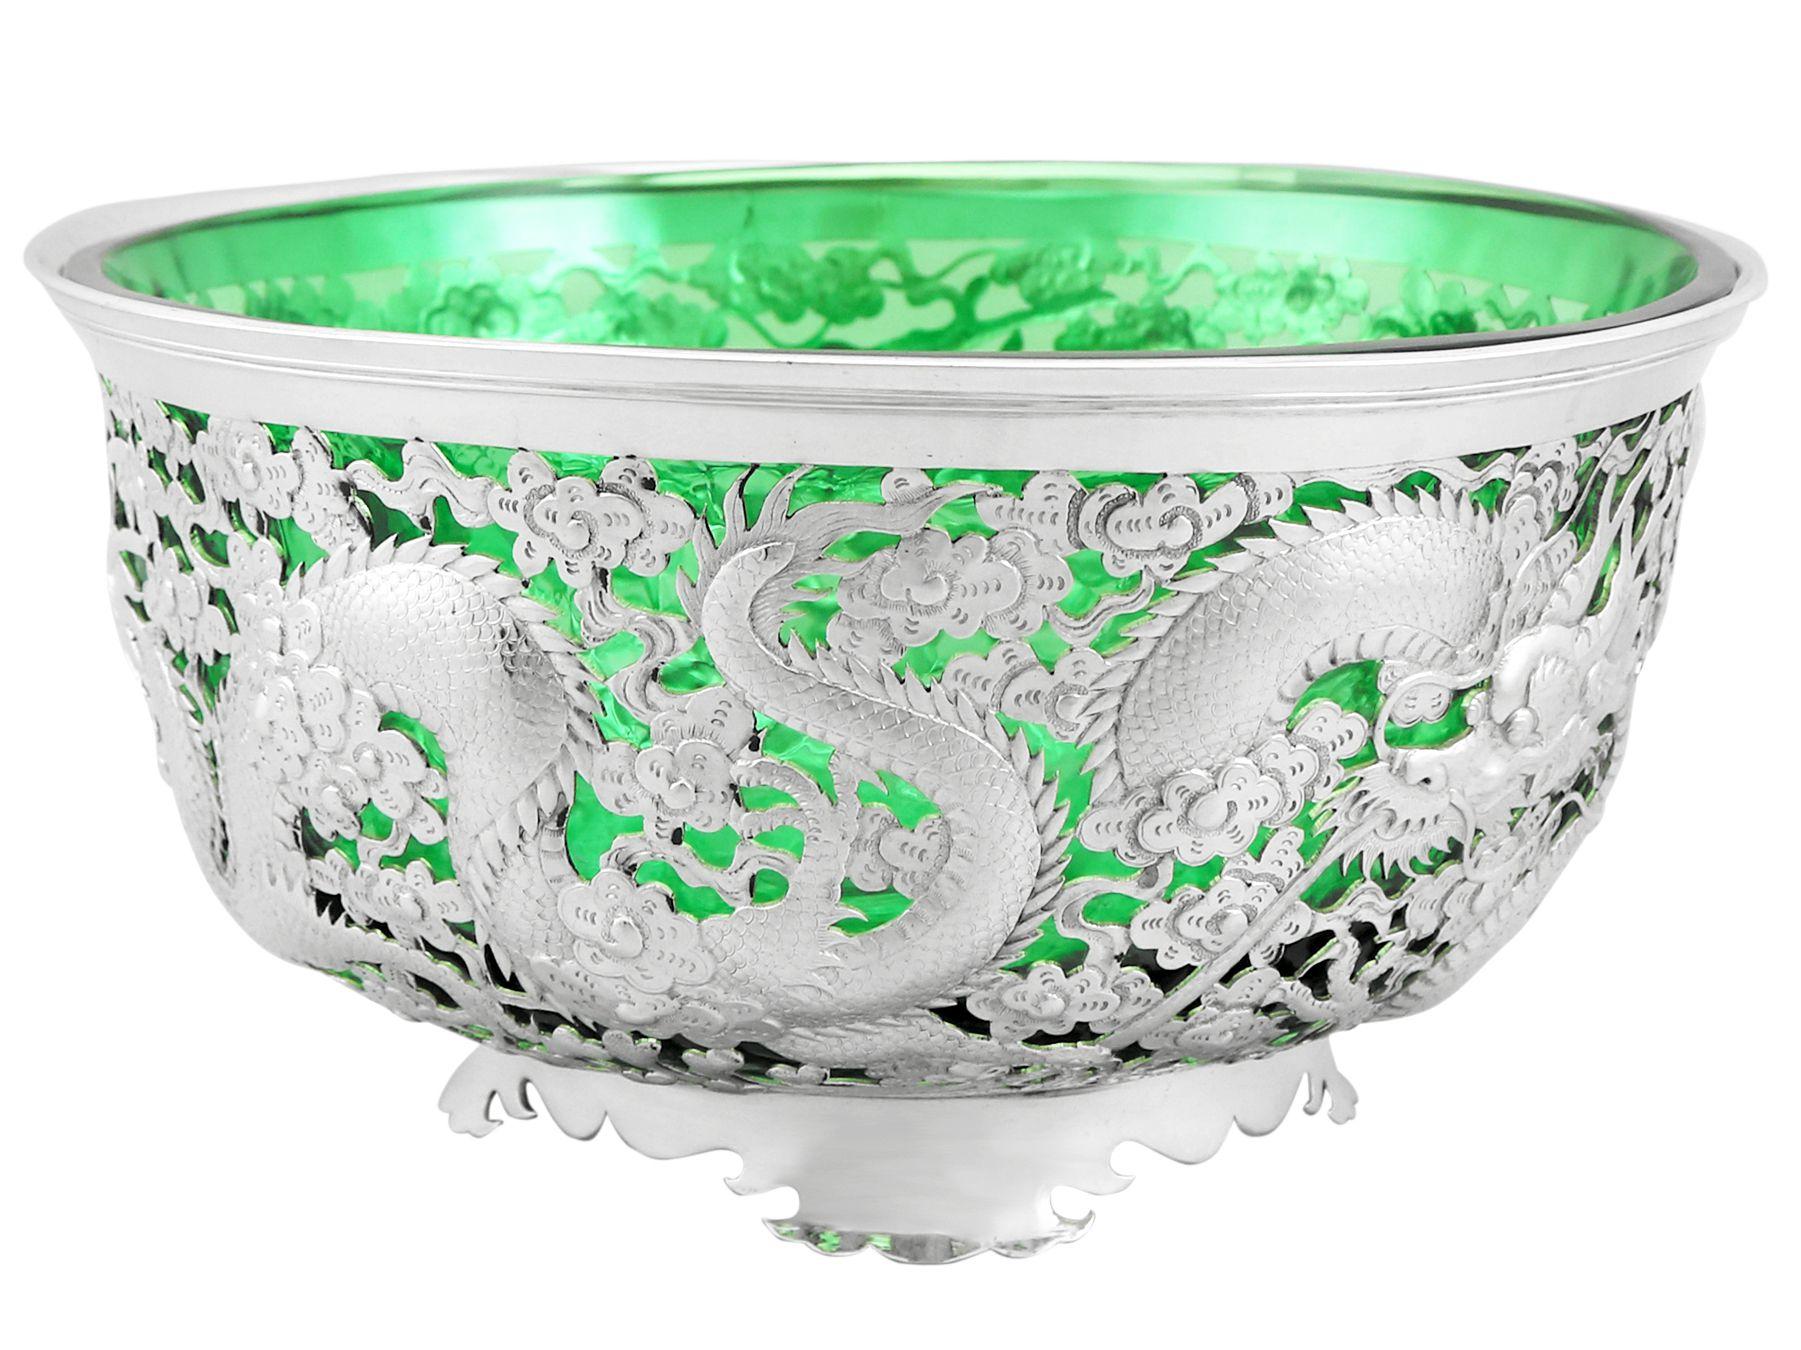 Antique Chinese Export Silver Bowl, circa 1890 In Excellent Condition For Sale In Jesmond, Newcastle Upon Tyne